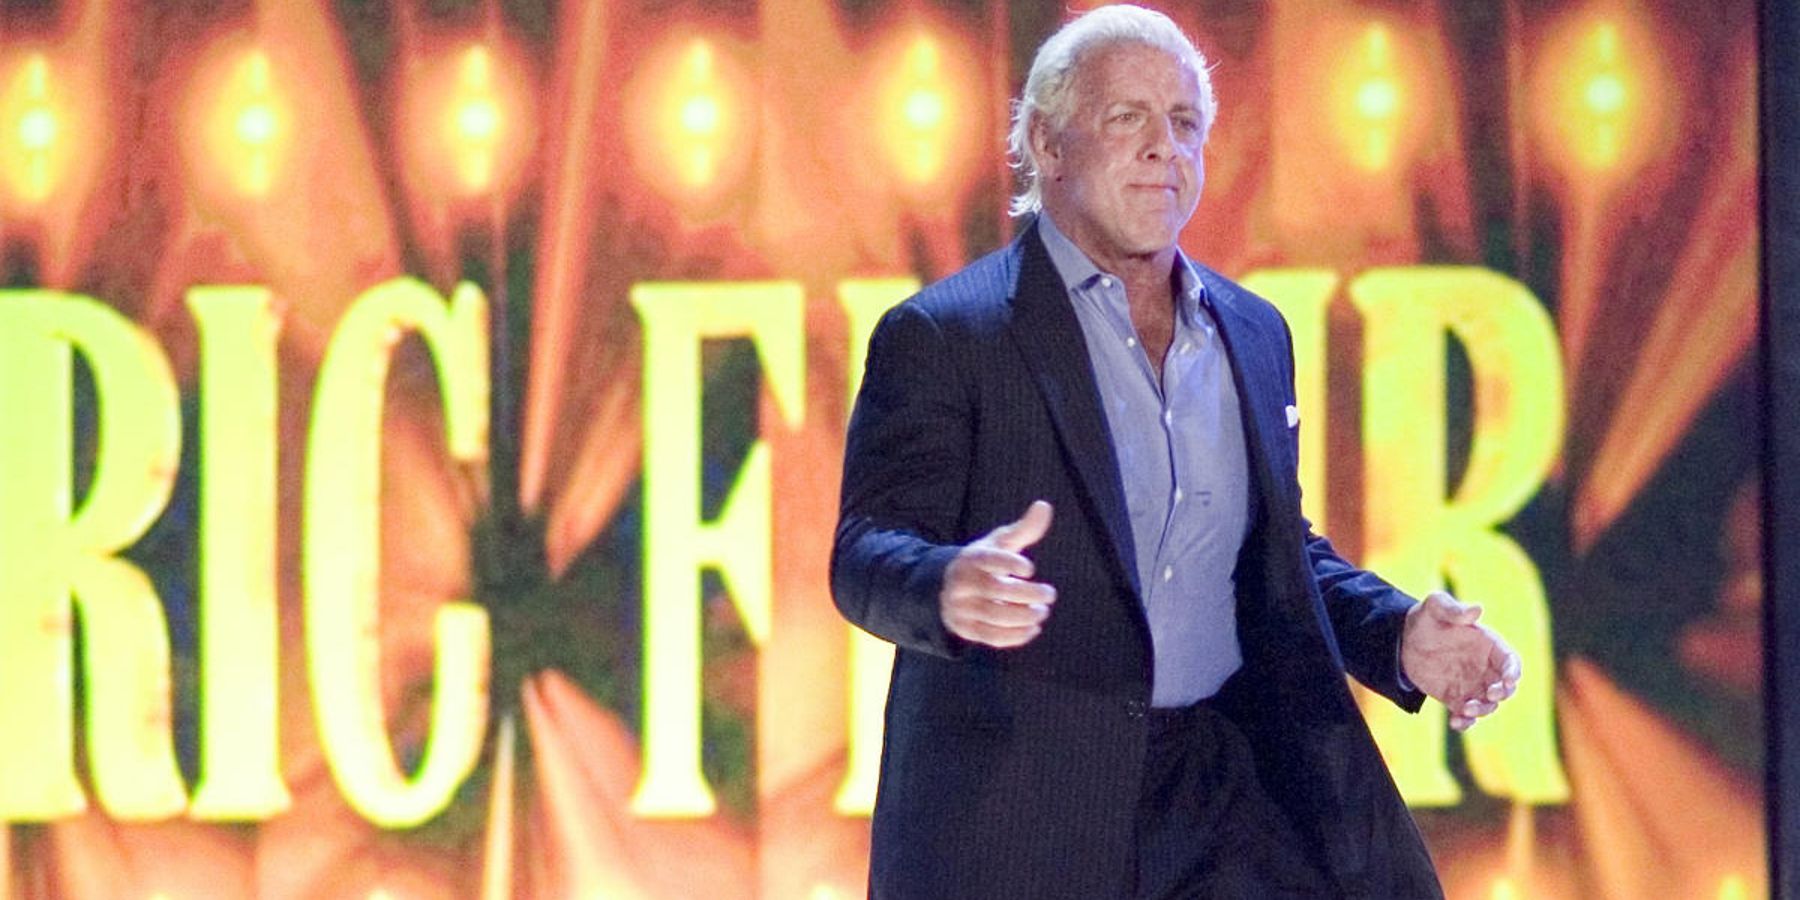 Ric Flair struts to the ring during a WWE show earlier in his career. 